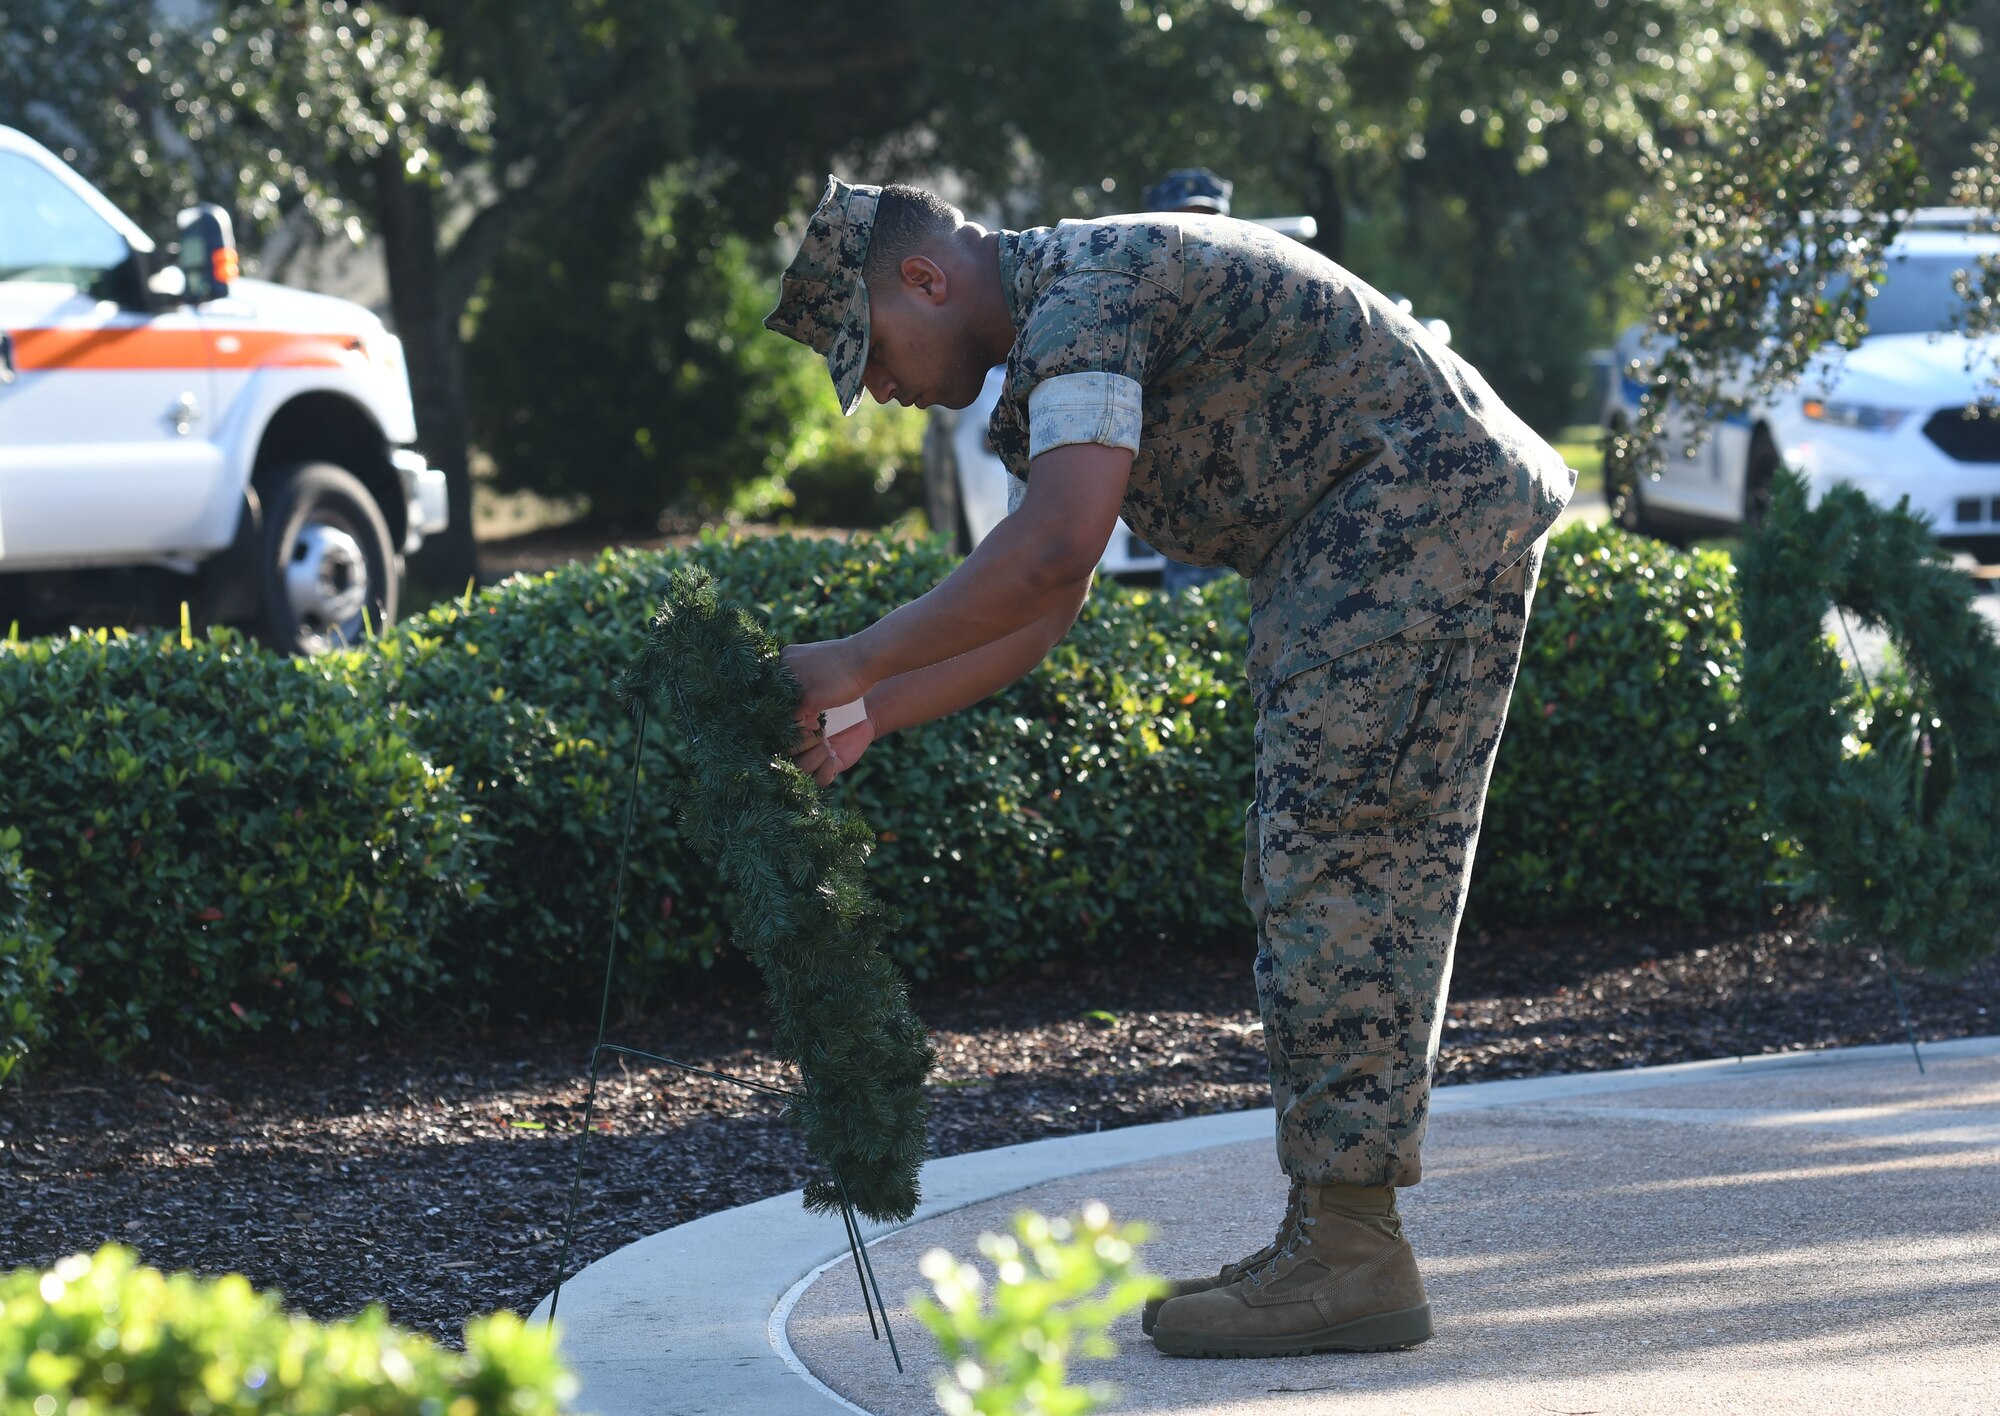 U.S. Marine Corps Private 1st Class Victor Vargas, Keesler Marine Detachment student, places a name tag on a memorial wreath during a 9/11 ceremony in front of the 81st Training Wing headquarters building at Keesler Air Force Base, Mississippi, Sept. 11, 2018. The event honored those who lost their lives during the 9/11 attacks. (U.S. Air Force photo by Kemberly Groue)